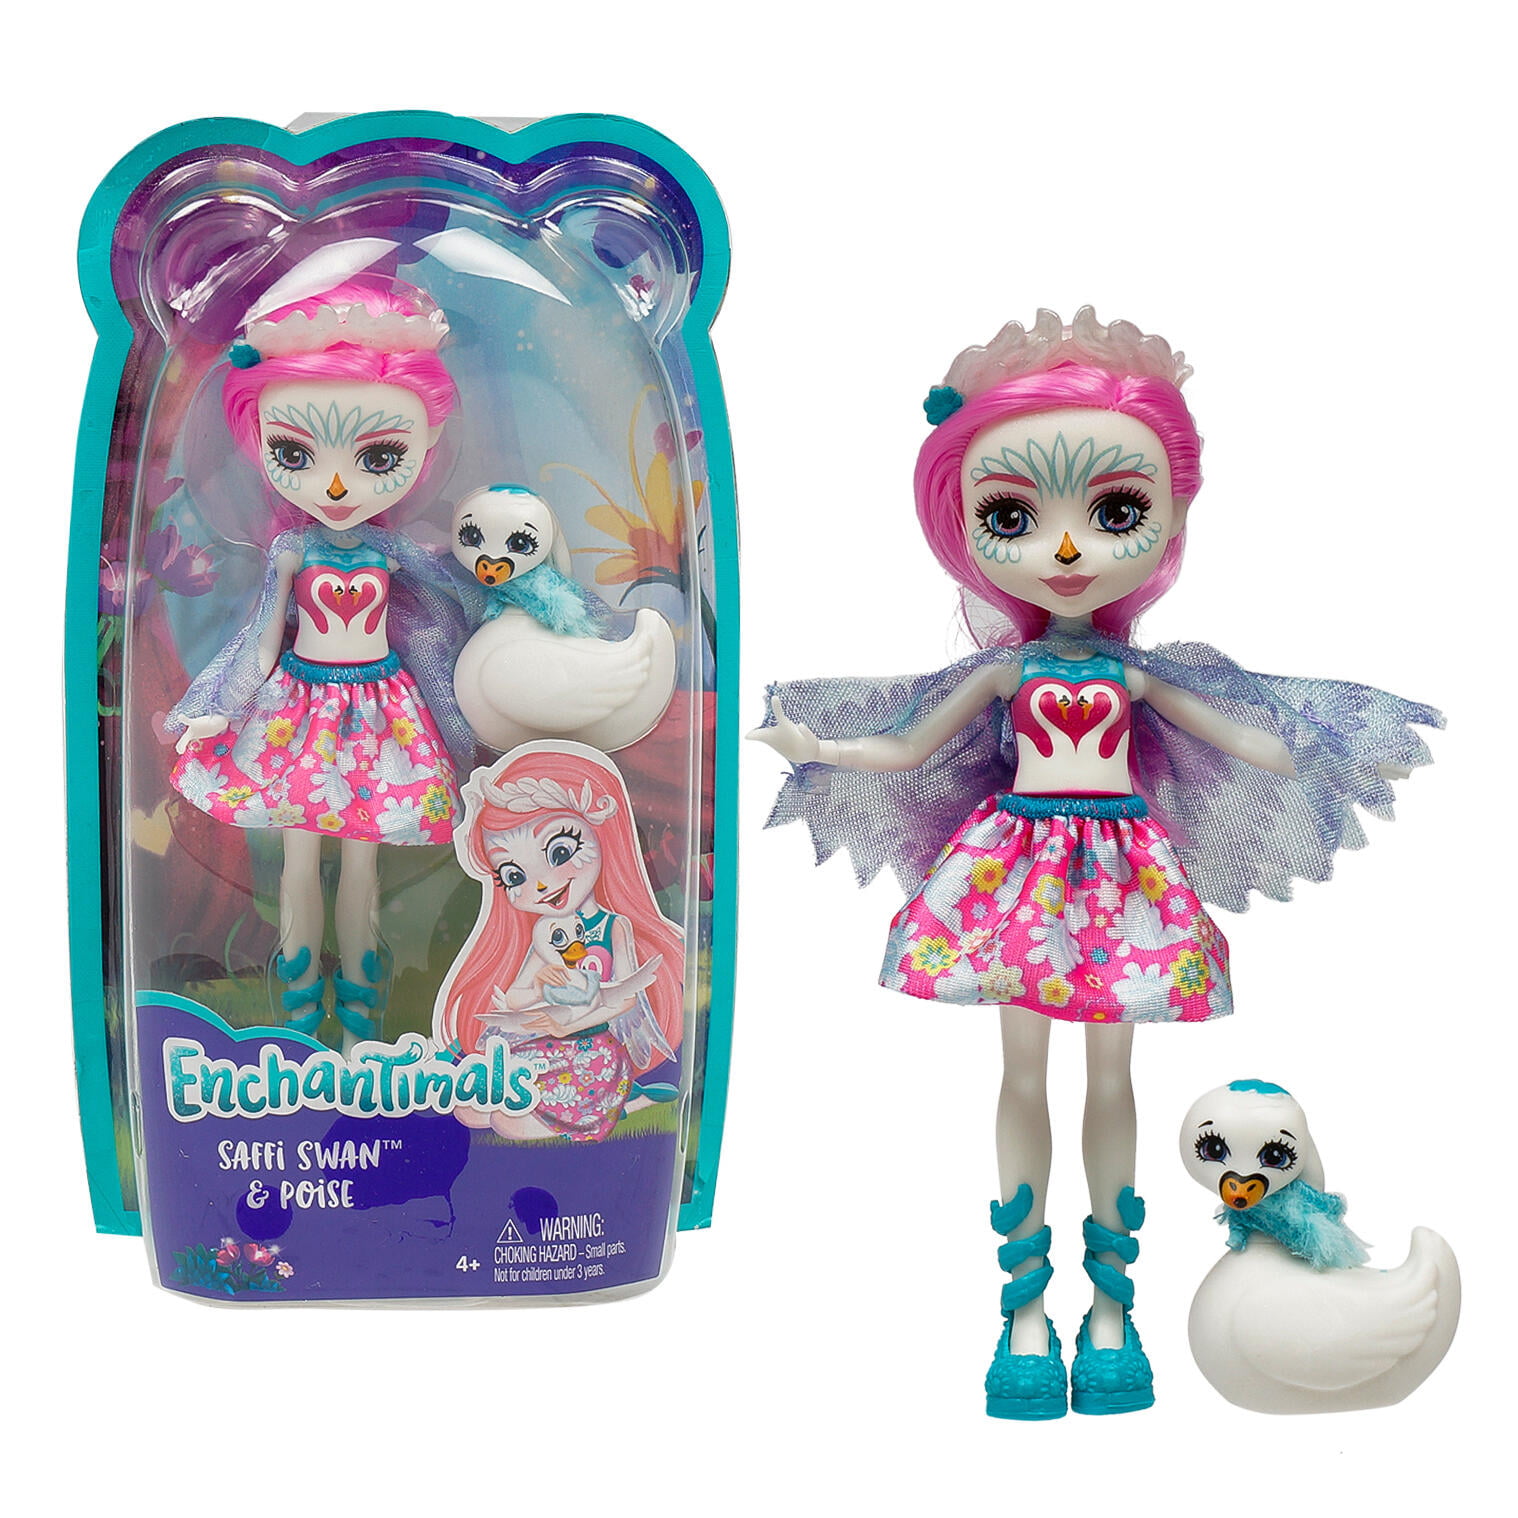 Enchantimals Saffi Swan Doll and Poise 6 Inch with Beautiful  Blue Shoes